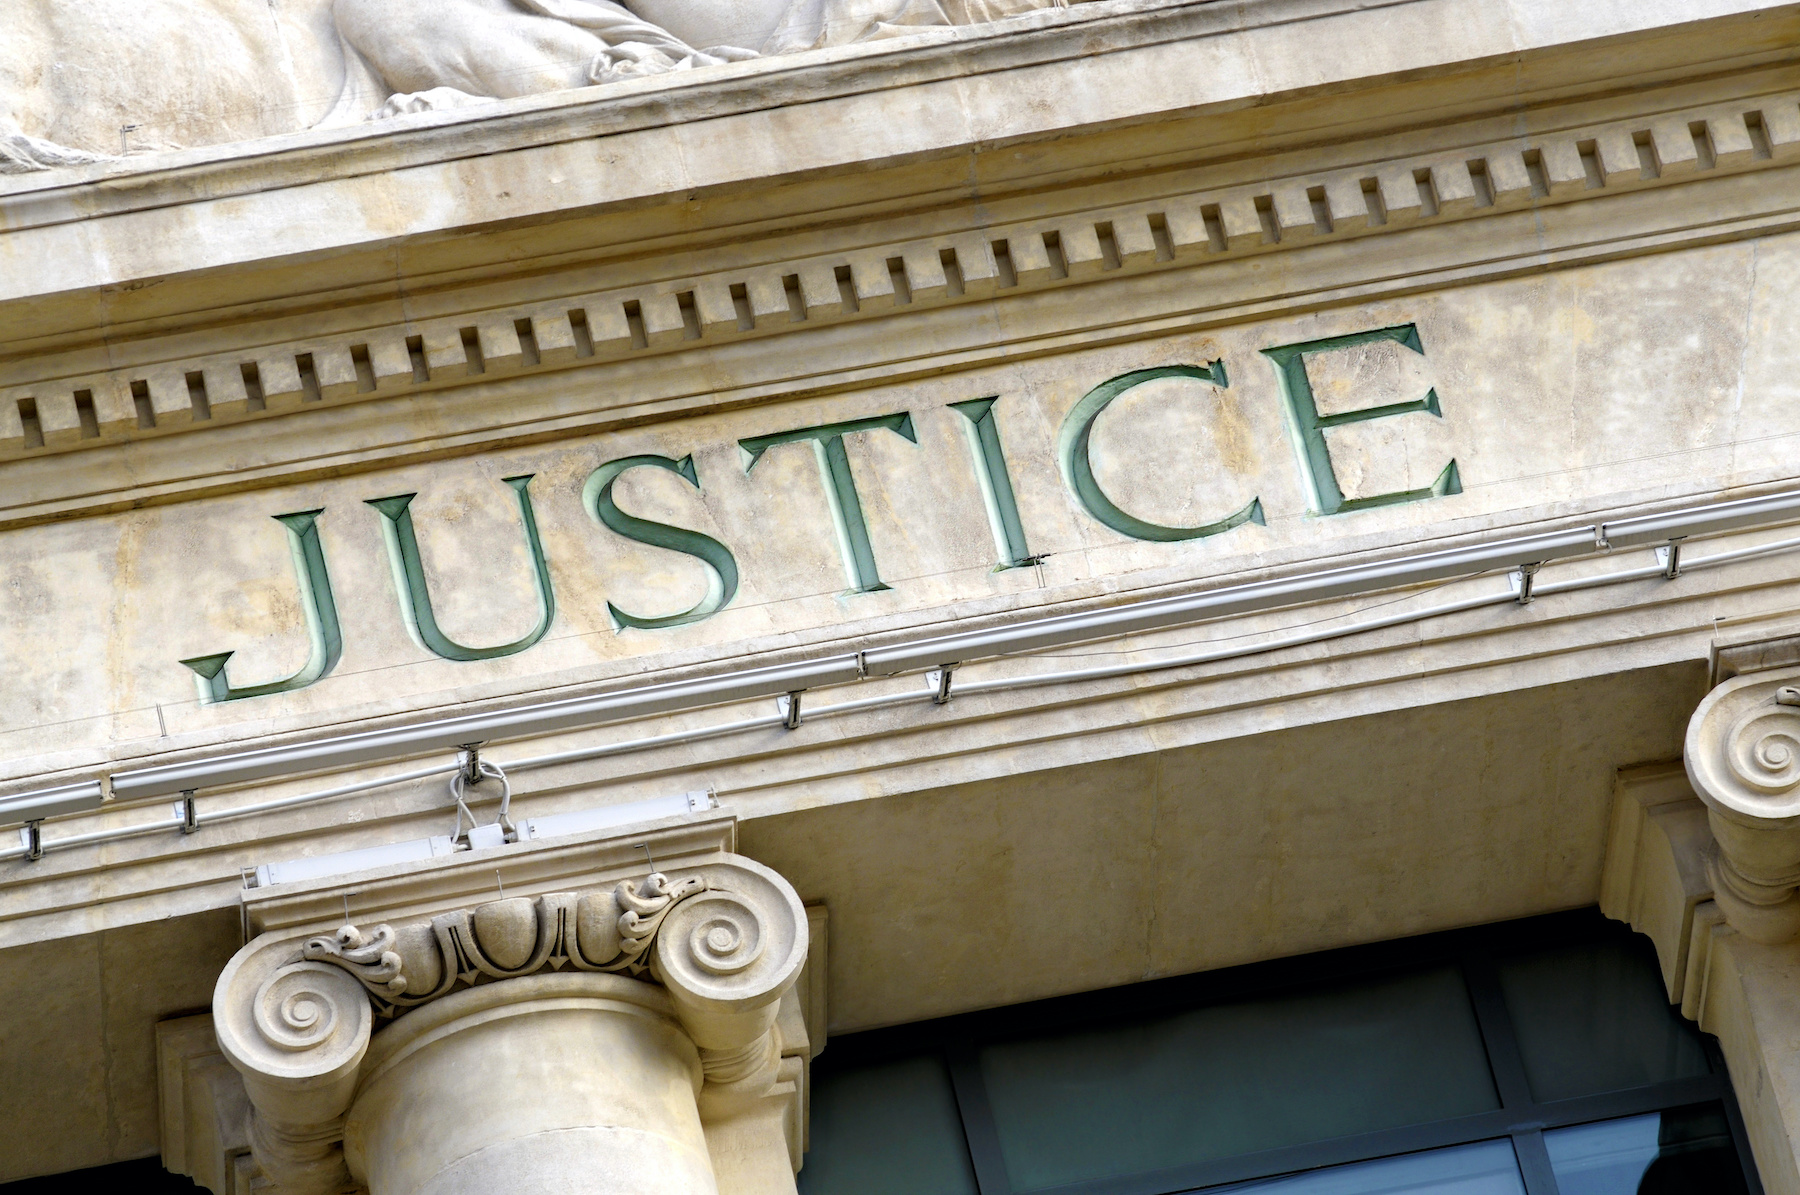 building column with the word Justice